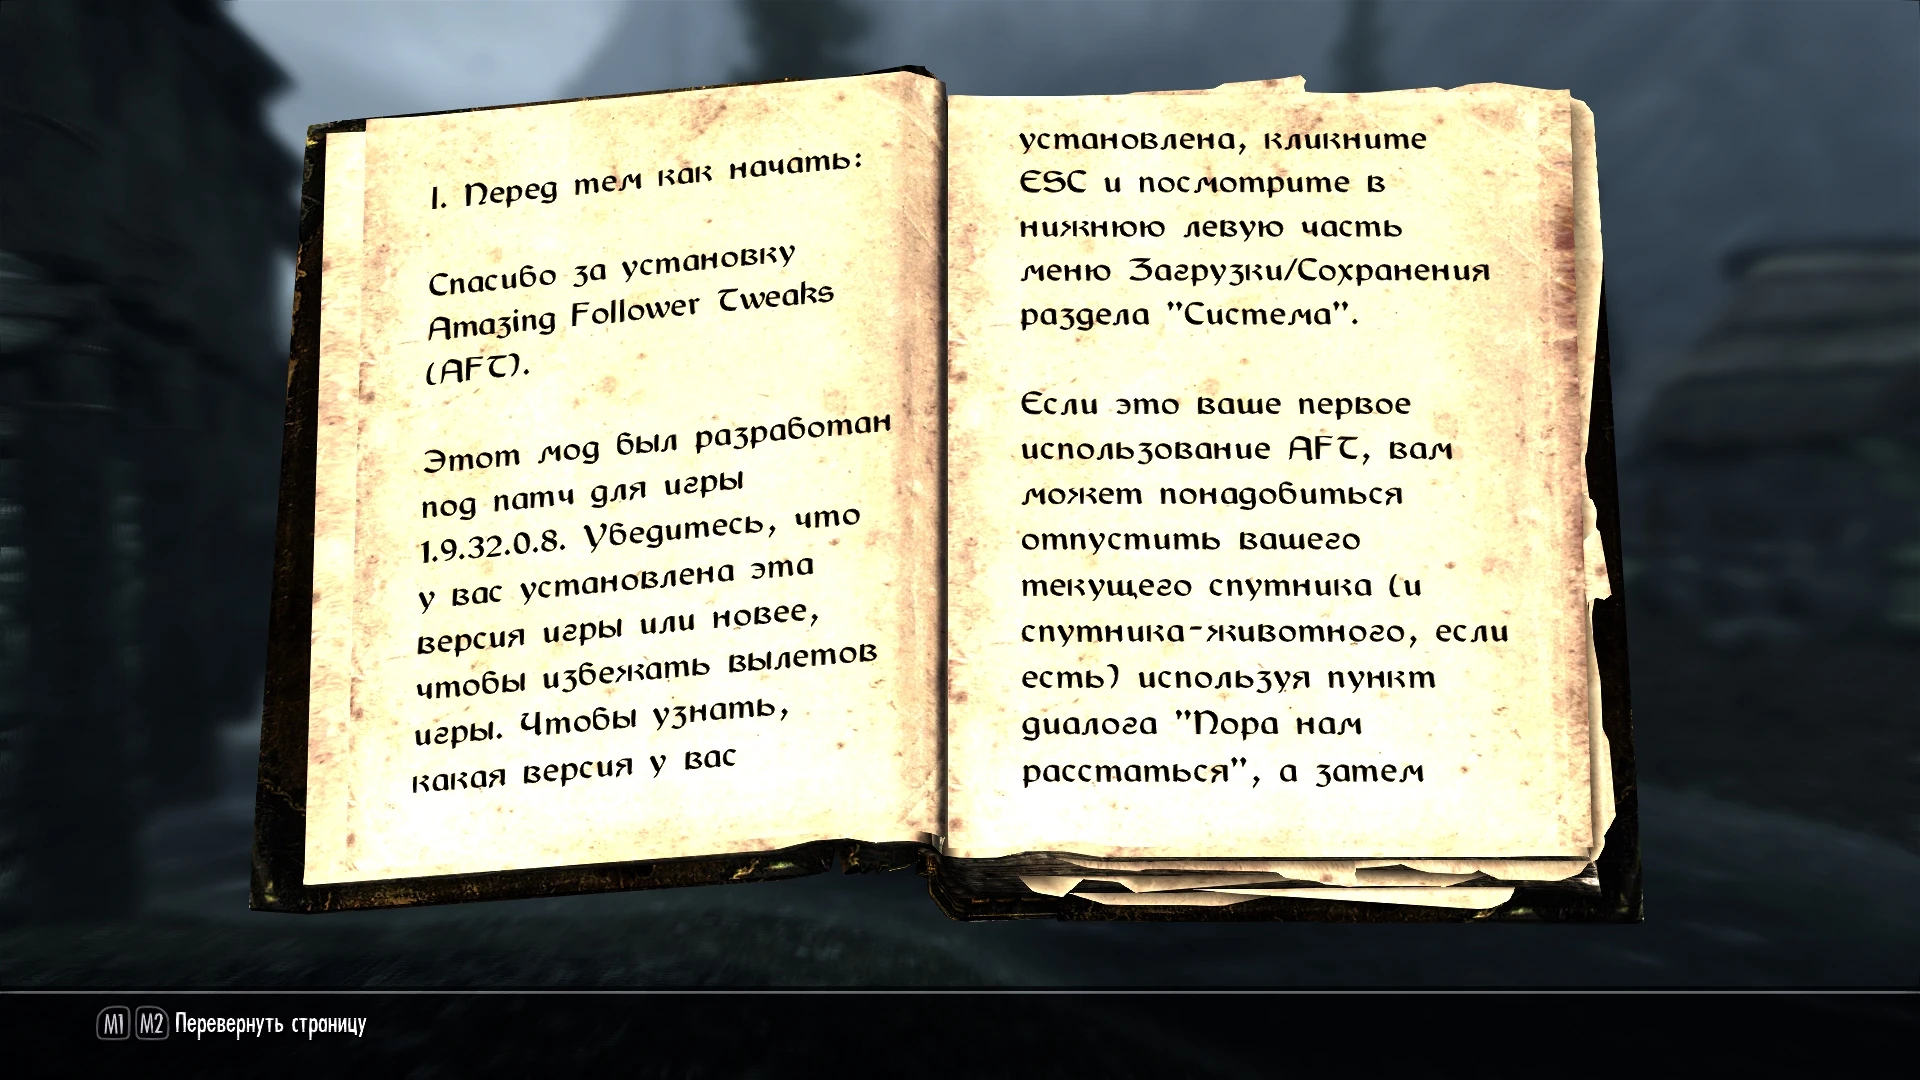 SKYRIM HOW TO CHANGE RUSSIAN VOICE TO ENGLISH